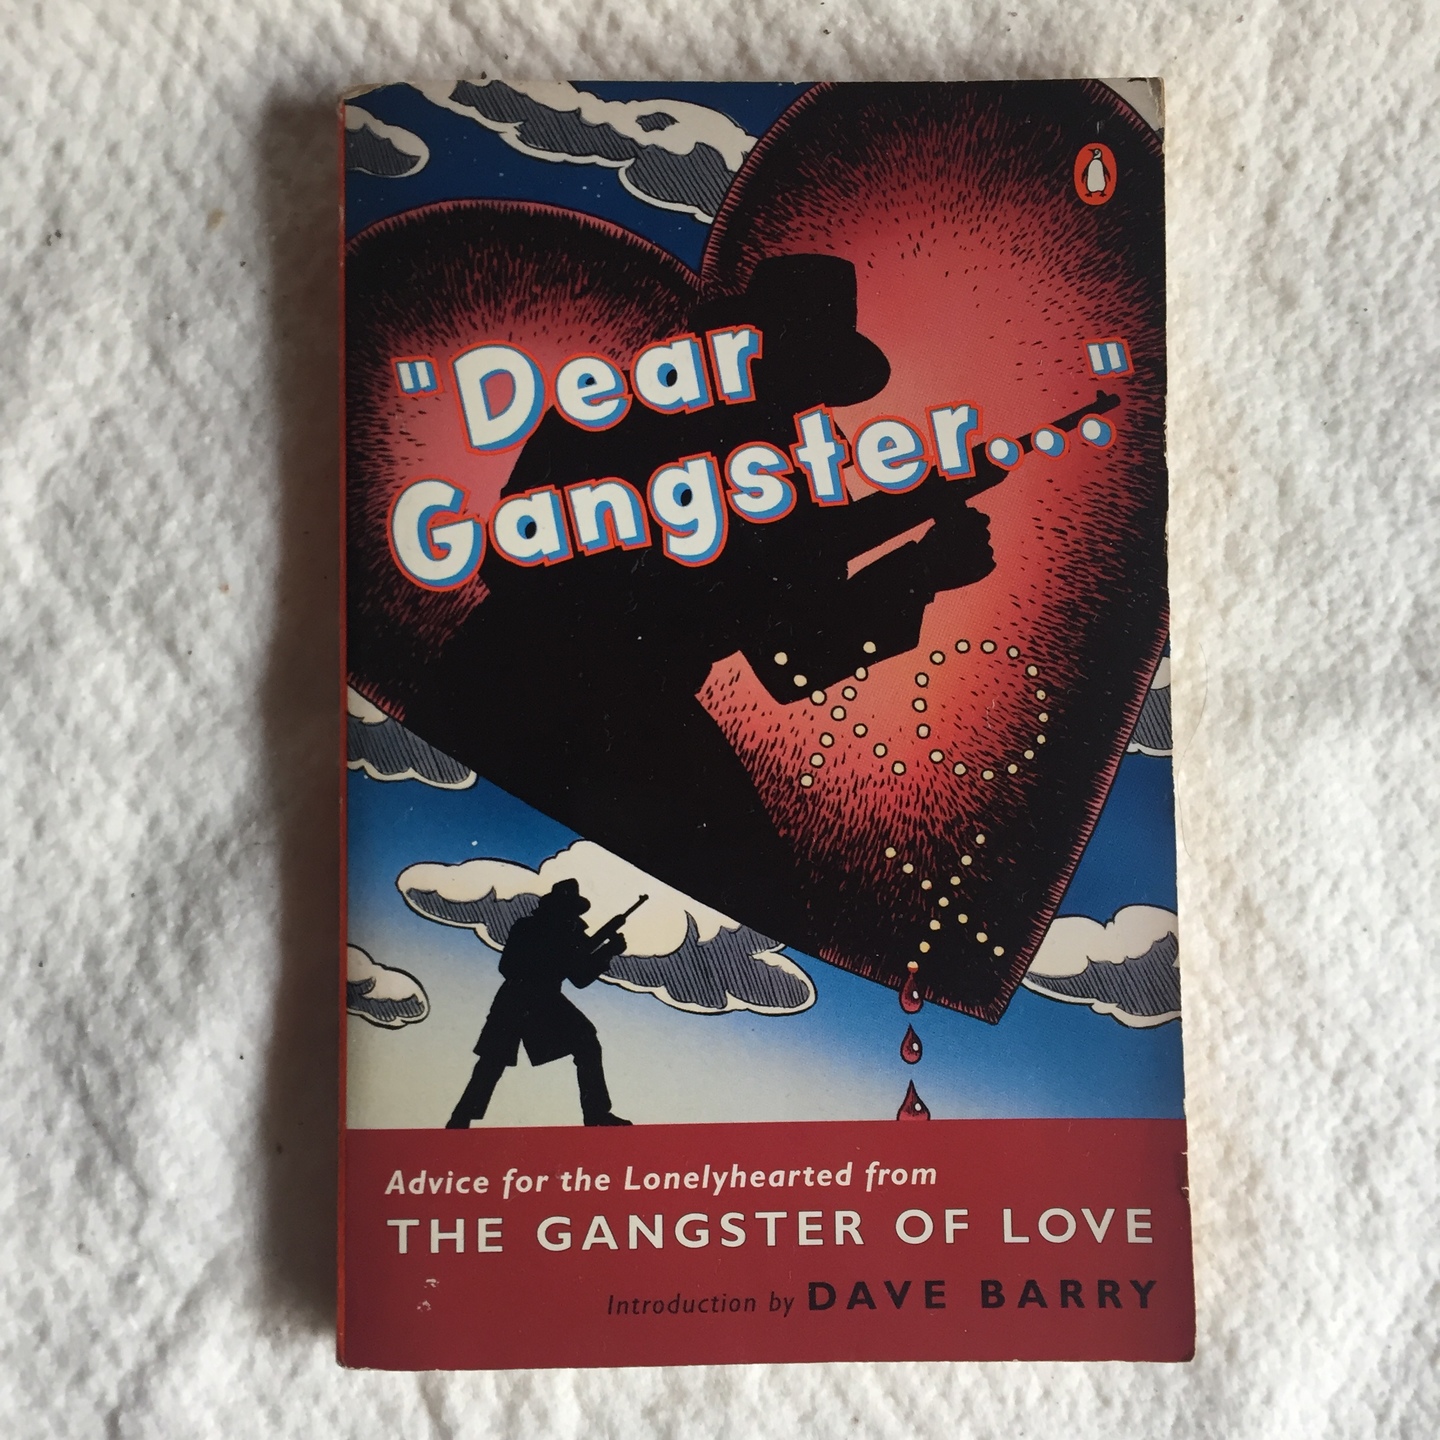 Dear Gangster: Advice for the Lonelyhearted from the Gangster of Love [Paperback]